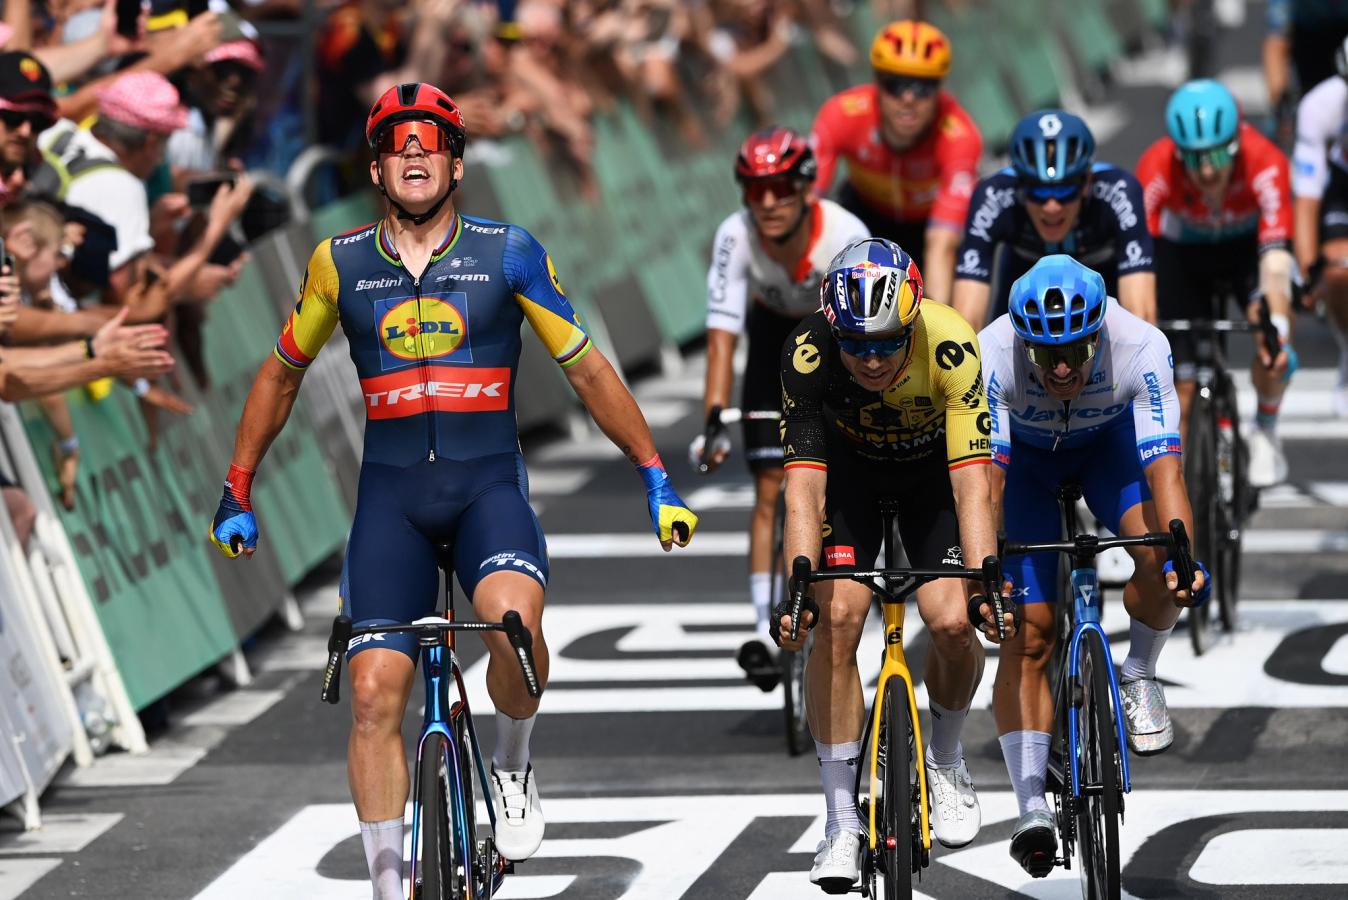 Mads Pedersen takes his second Tour de France stage win